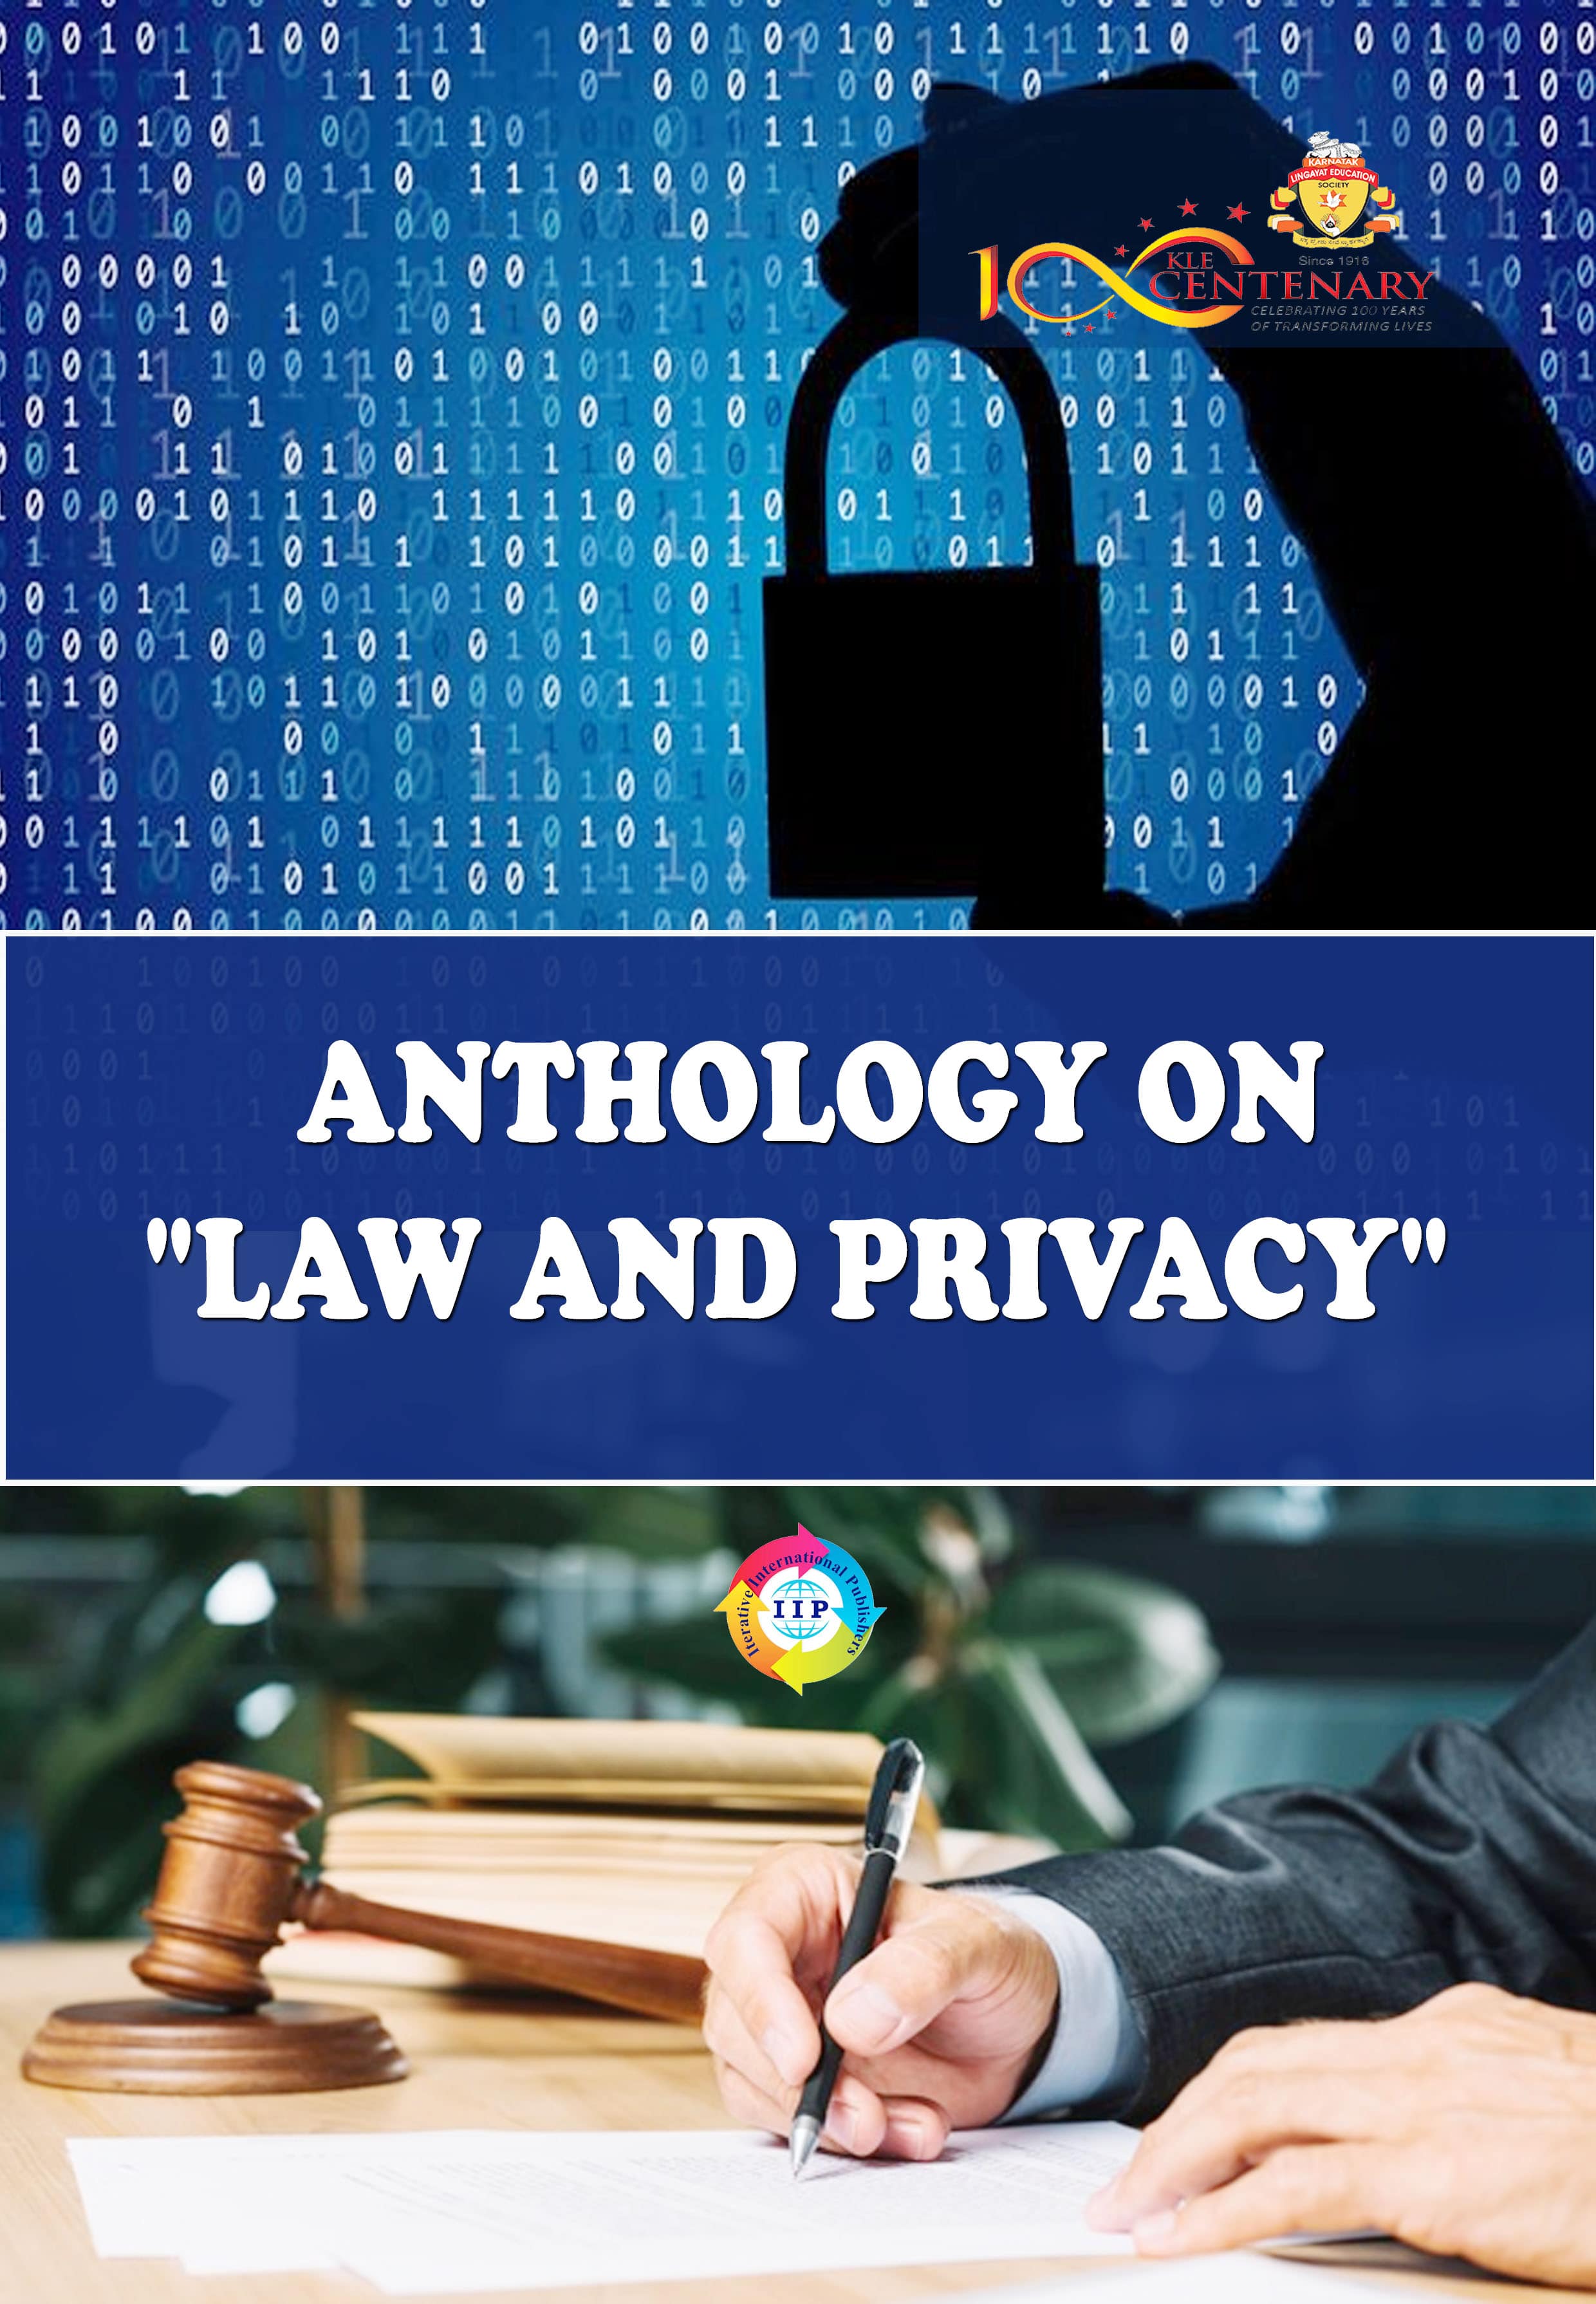 ANTHOLOGY ON LAW AND PRIVACY